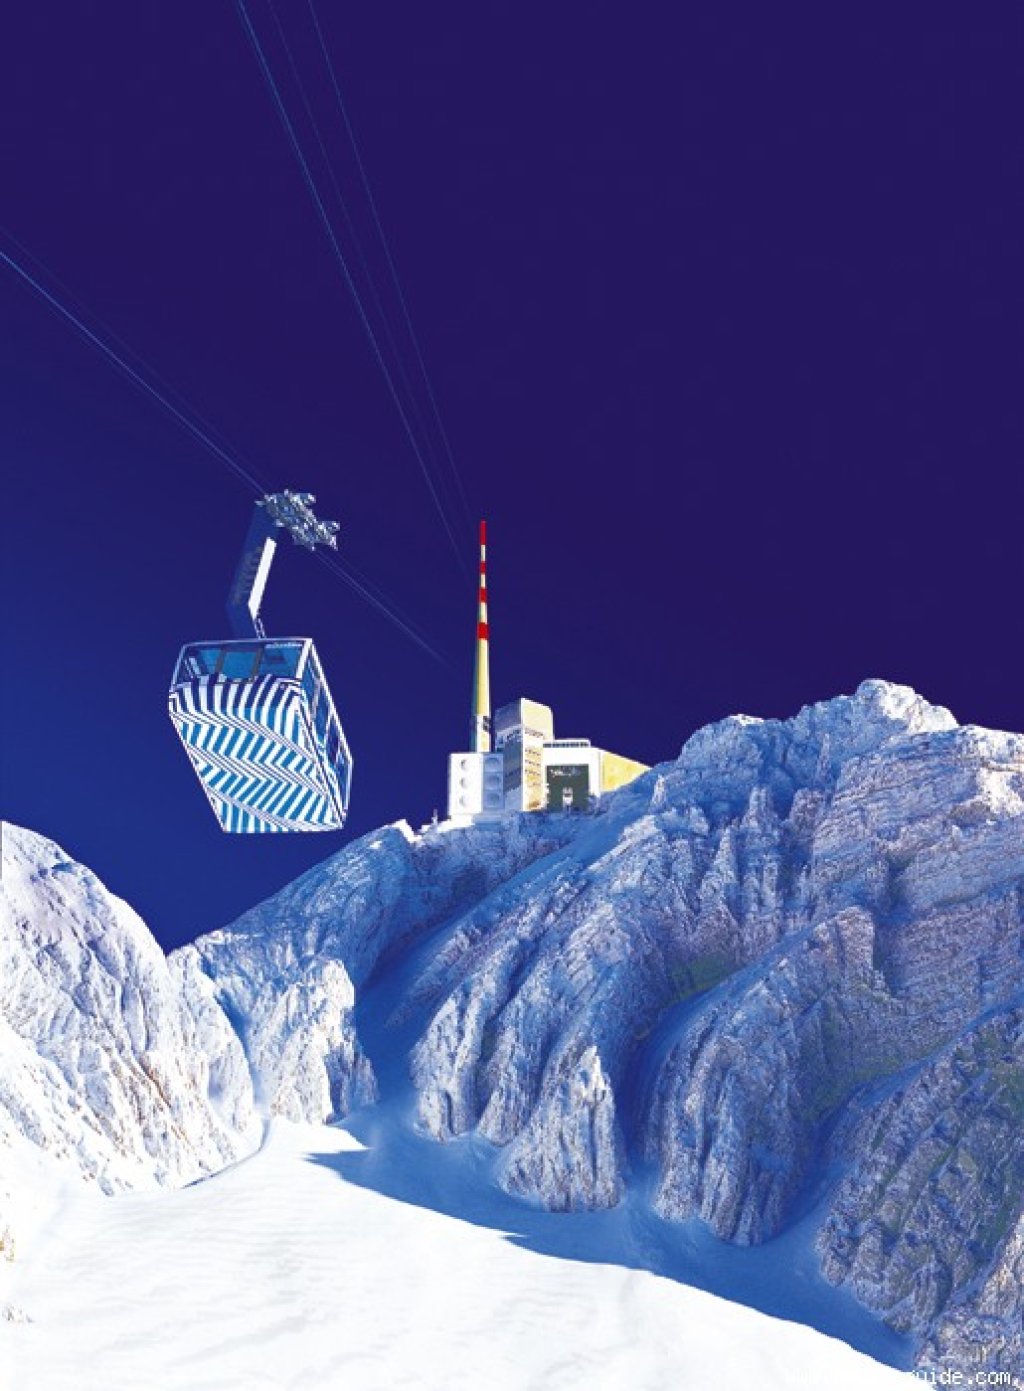 The 2502 m high Säntis summit is easily reached by taking the Säntis cable car from Schwägalp.